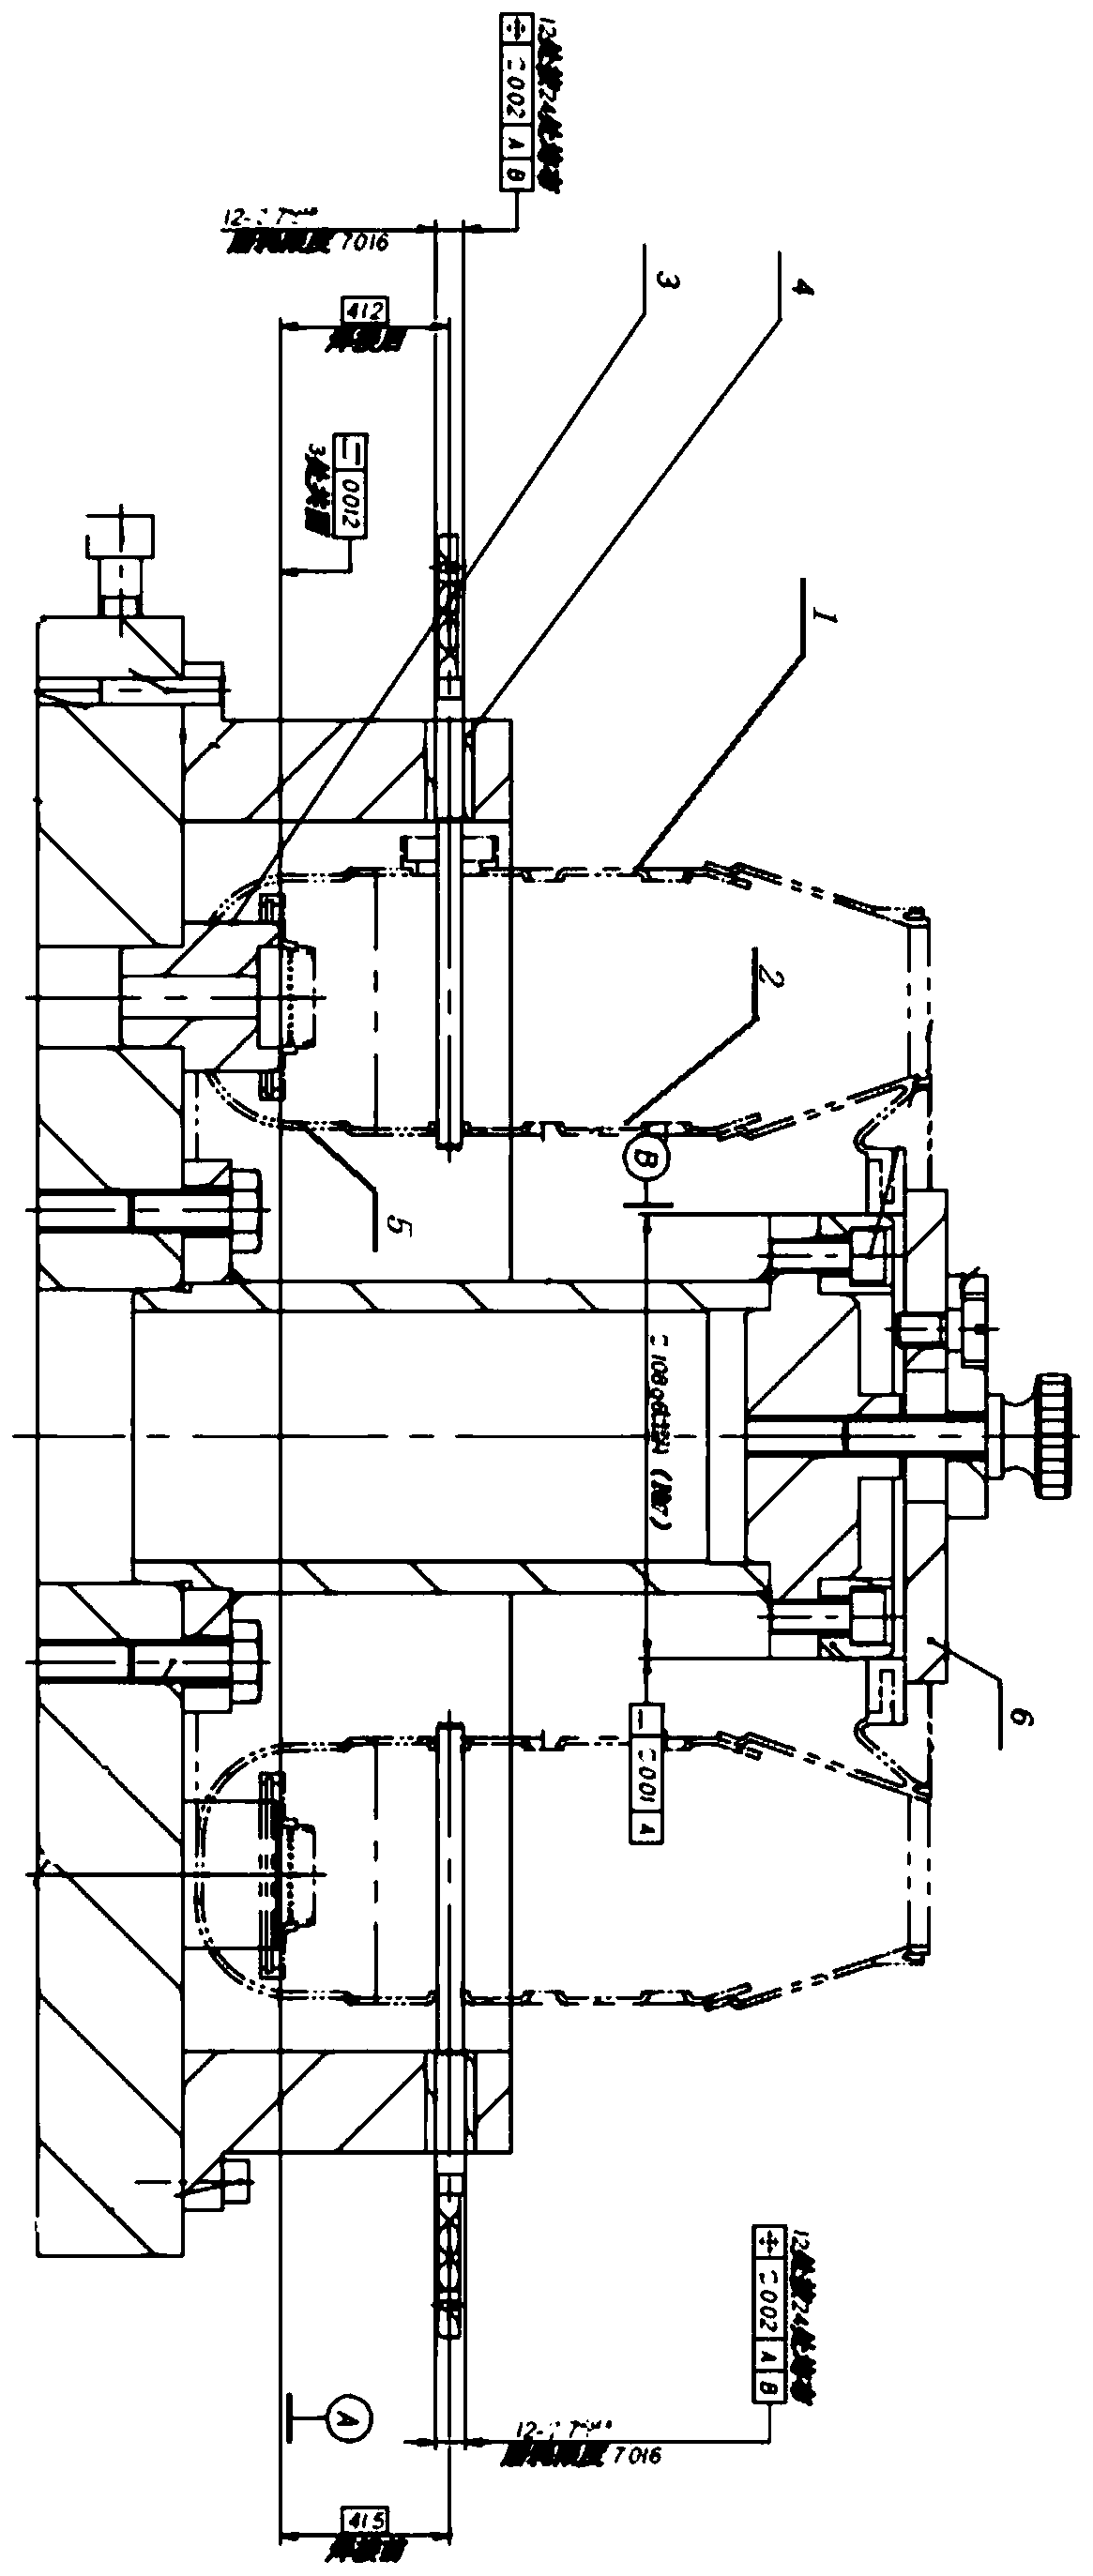 Vacuum electron beam welding deformation control method and device for aero-engine flame tube